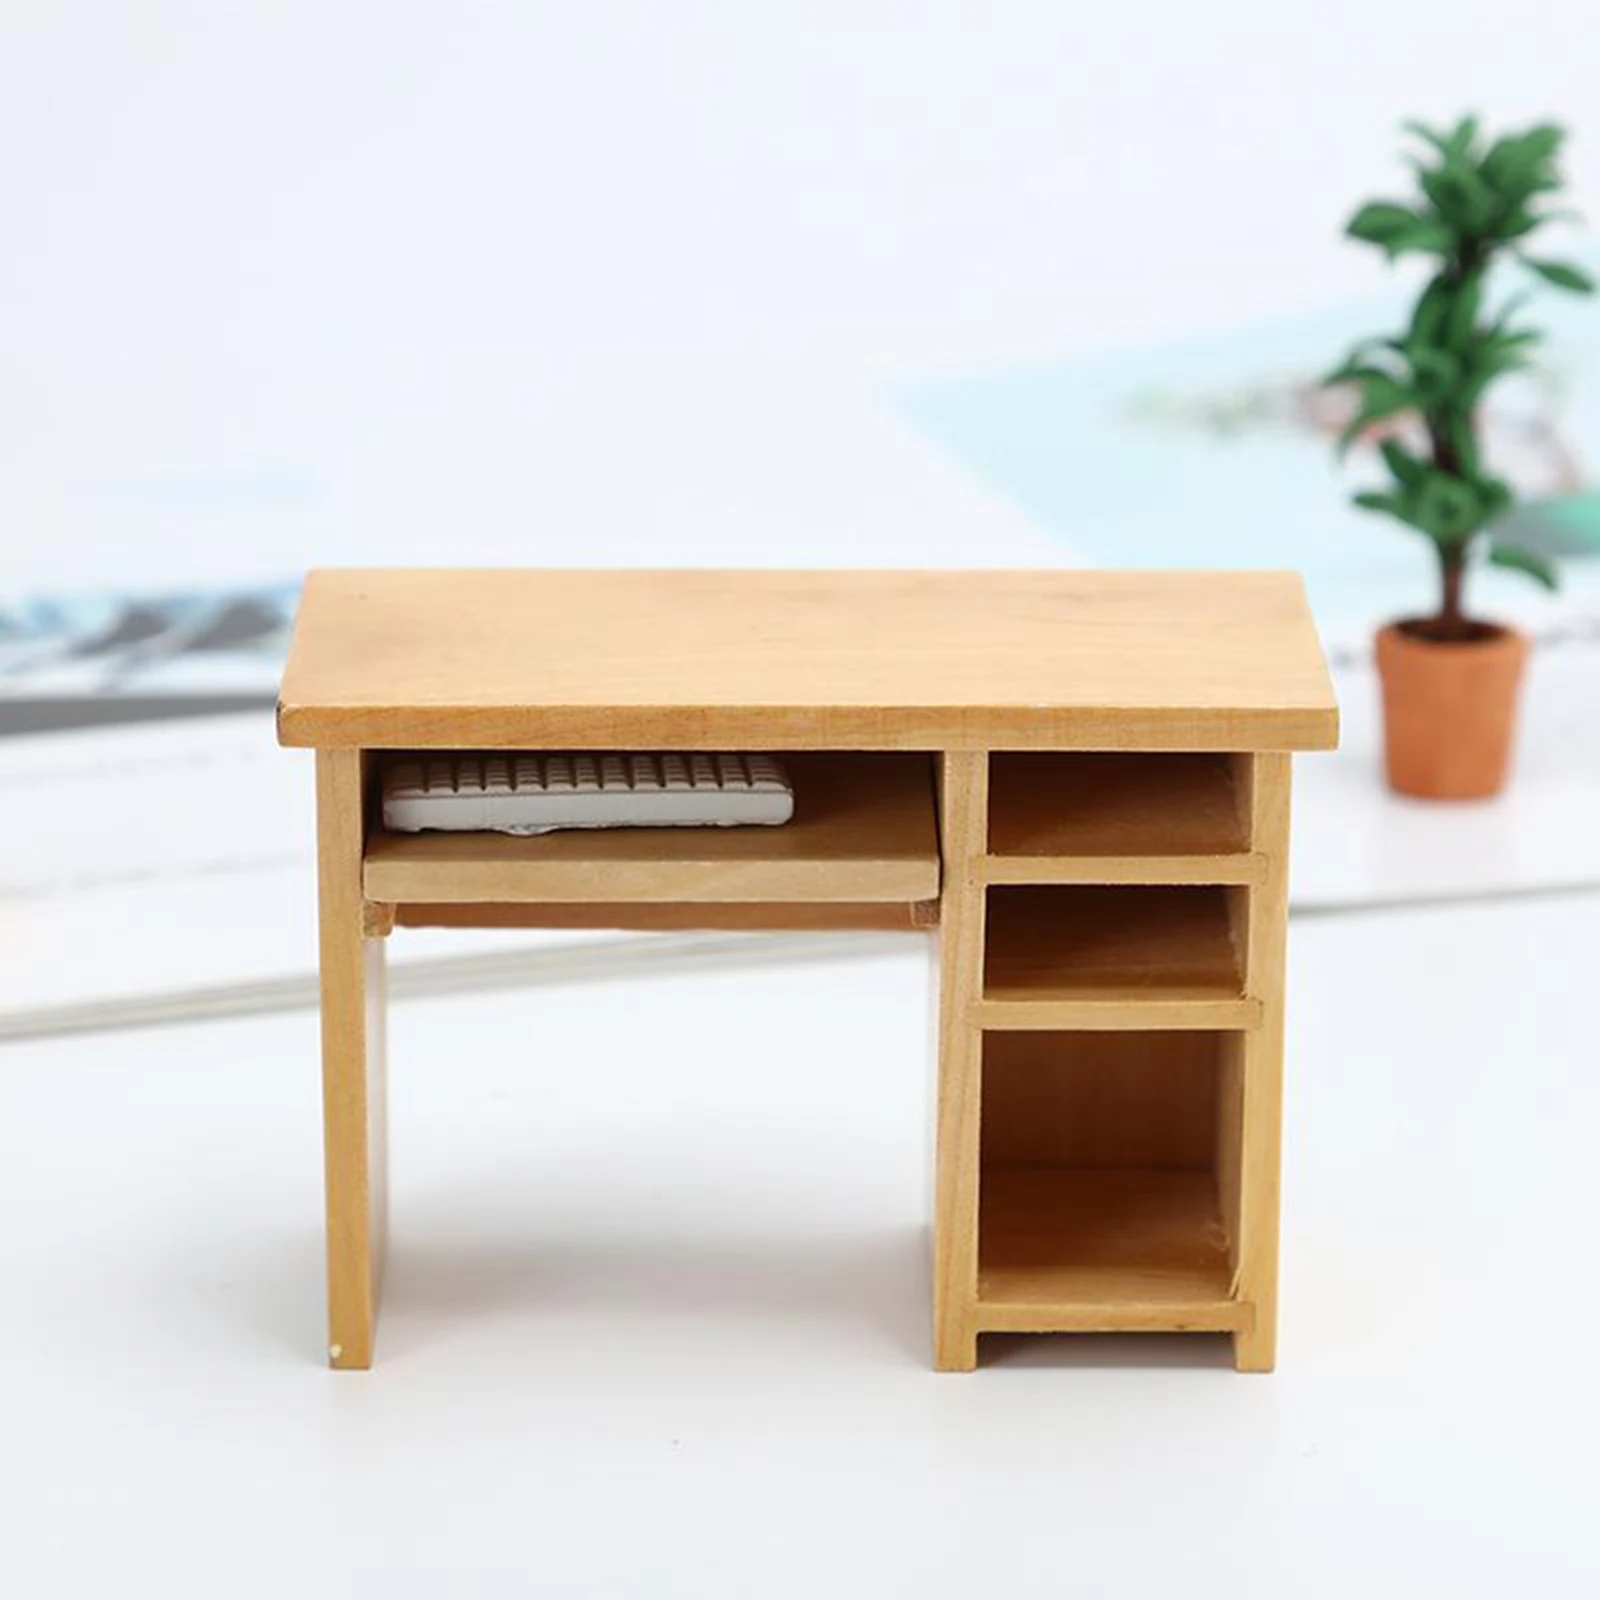 Cute Miniature Wooden Computer Desk with Mouse and Keyboard, 1:12 Scale